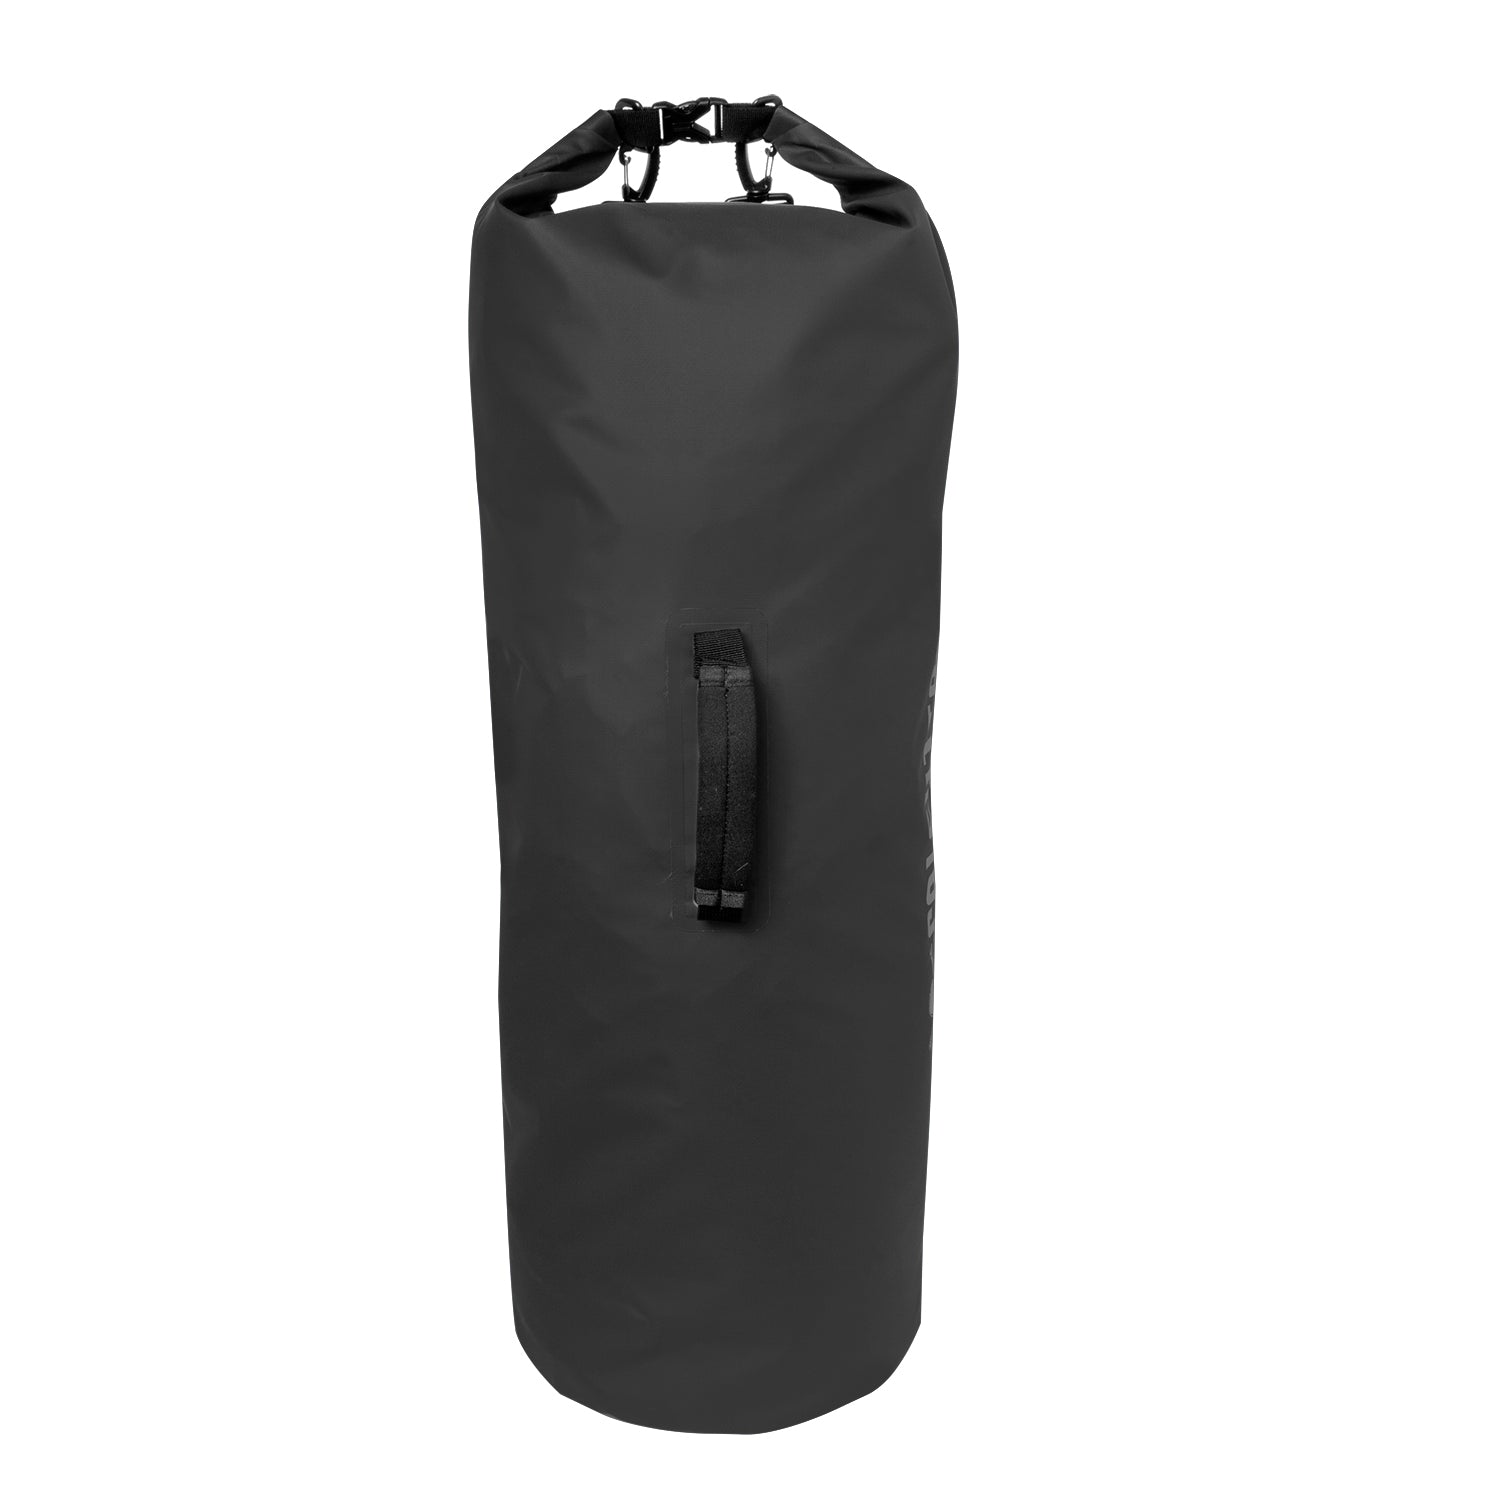 Calcutta dry bag 60L black side with carry handle